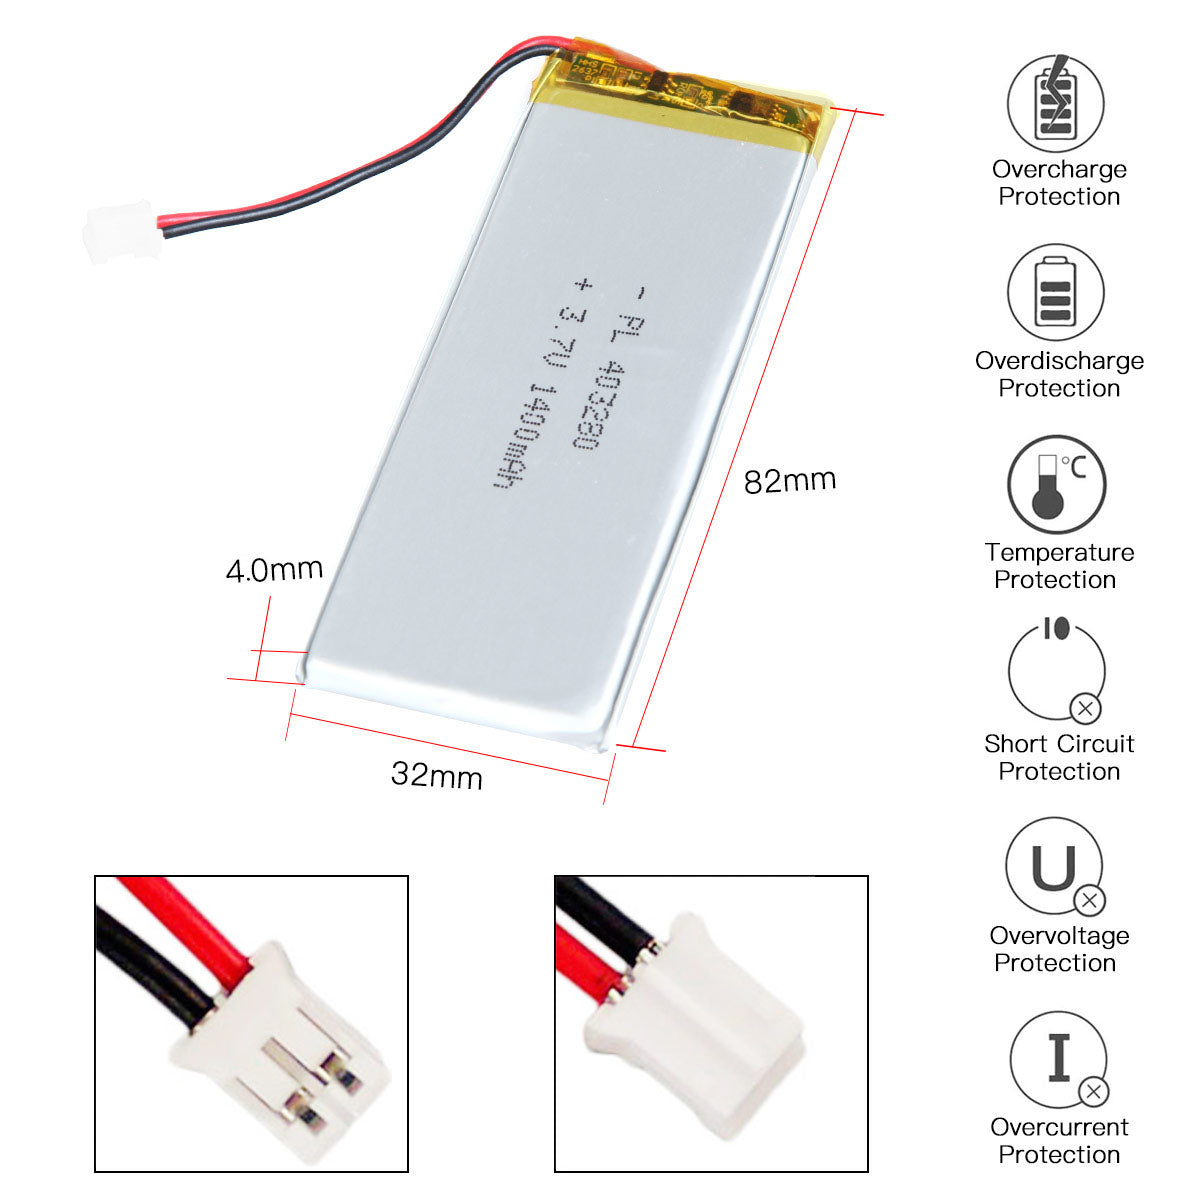 YDL 3.7V 1400mAh 403280 Rechargeable Lipo Battery with JST Connector - YDL Battery